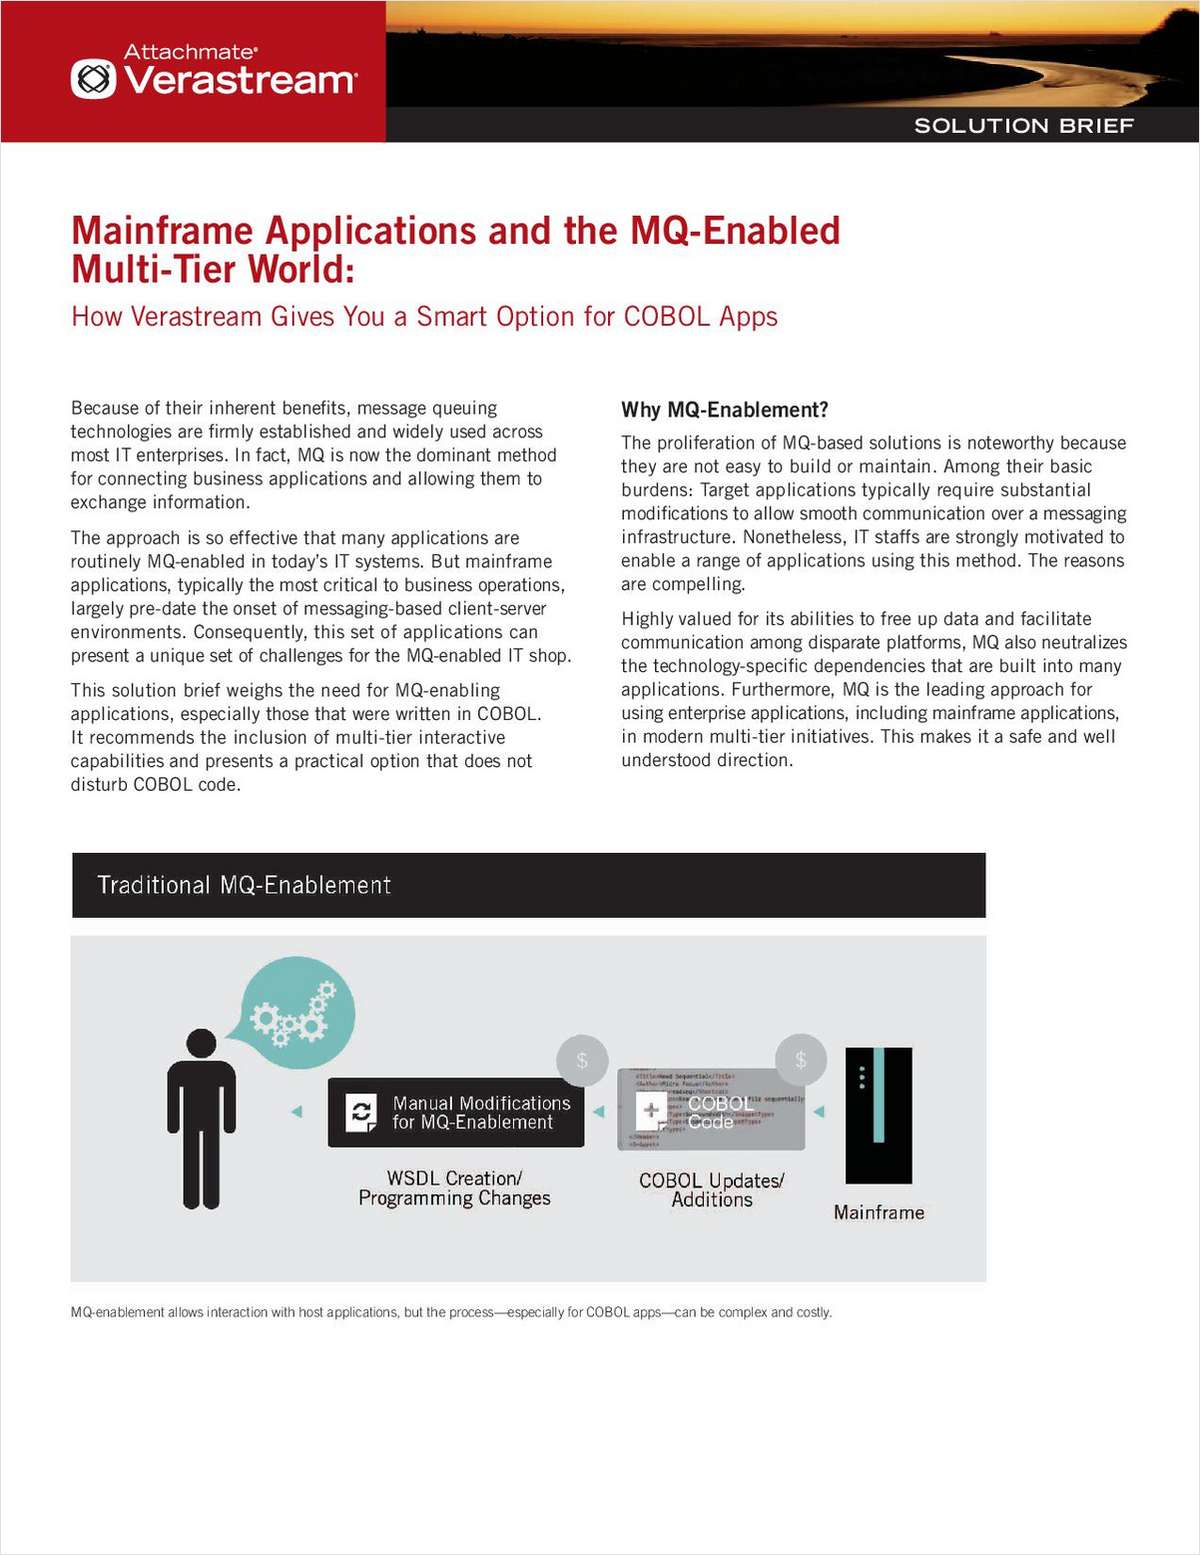 Mainframe Applications and the MQ-Enabled Multi-Tier World